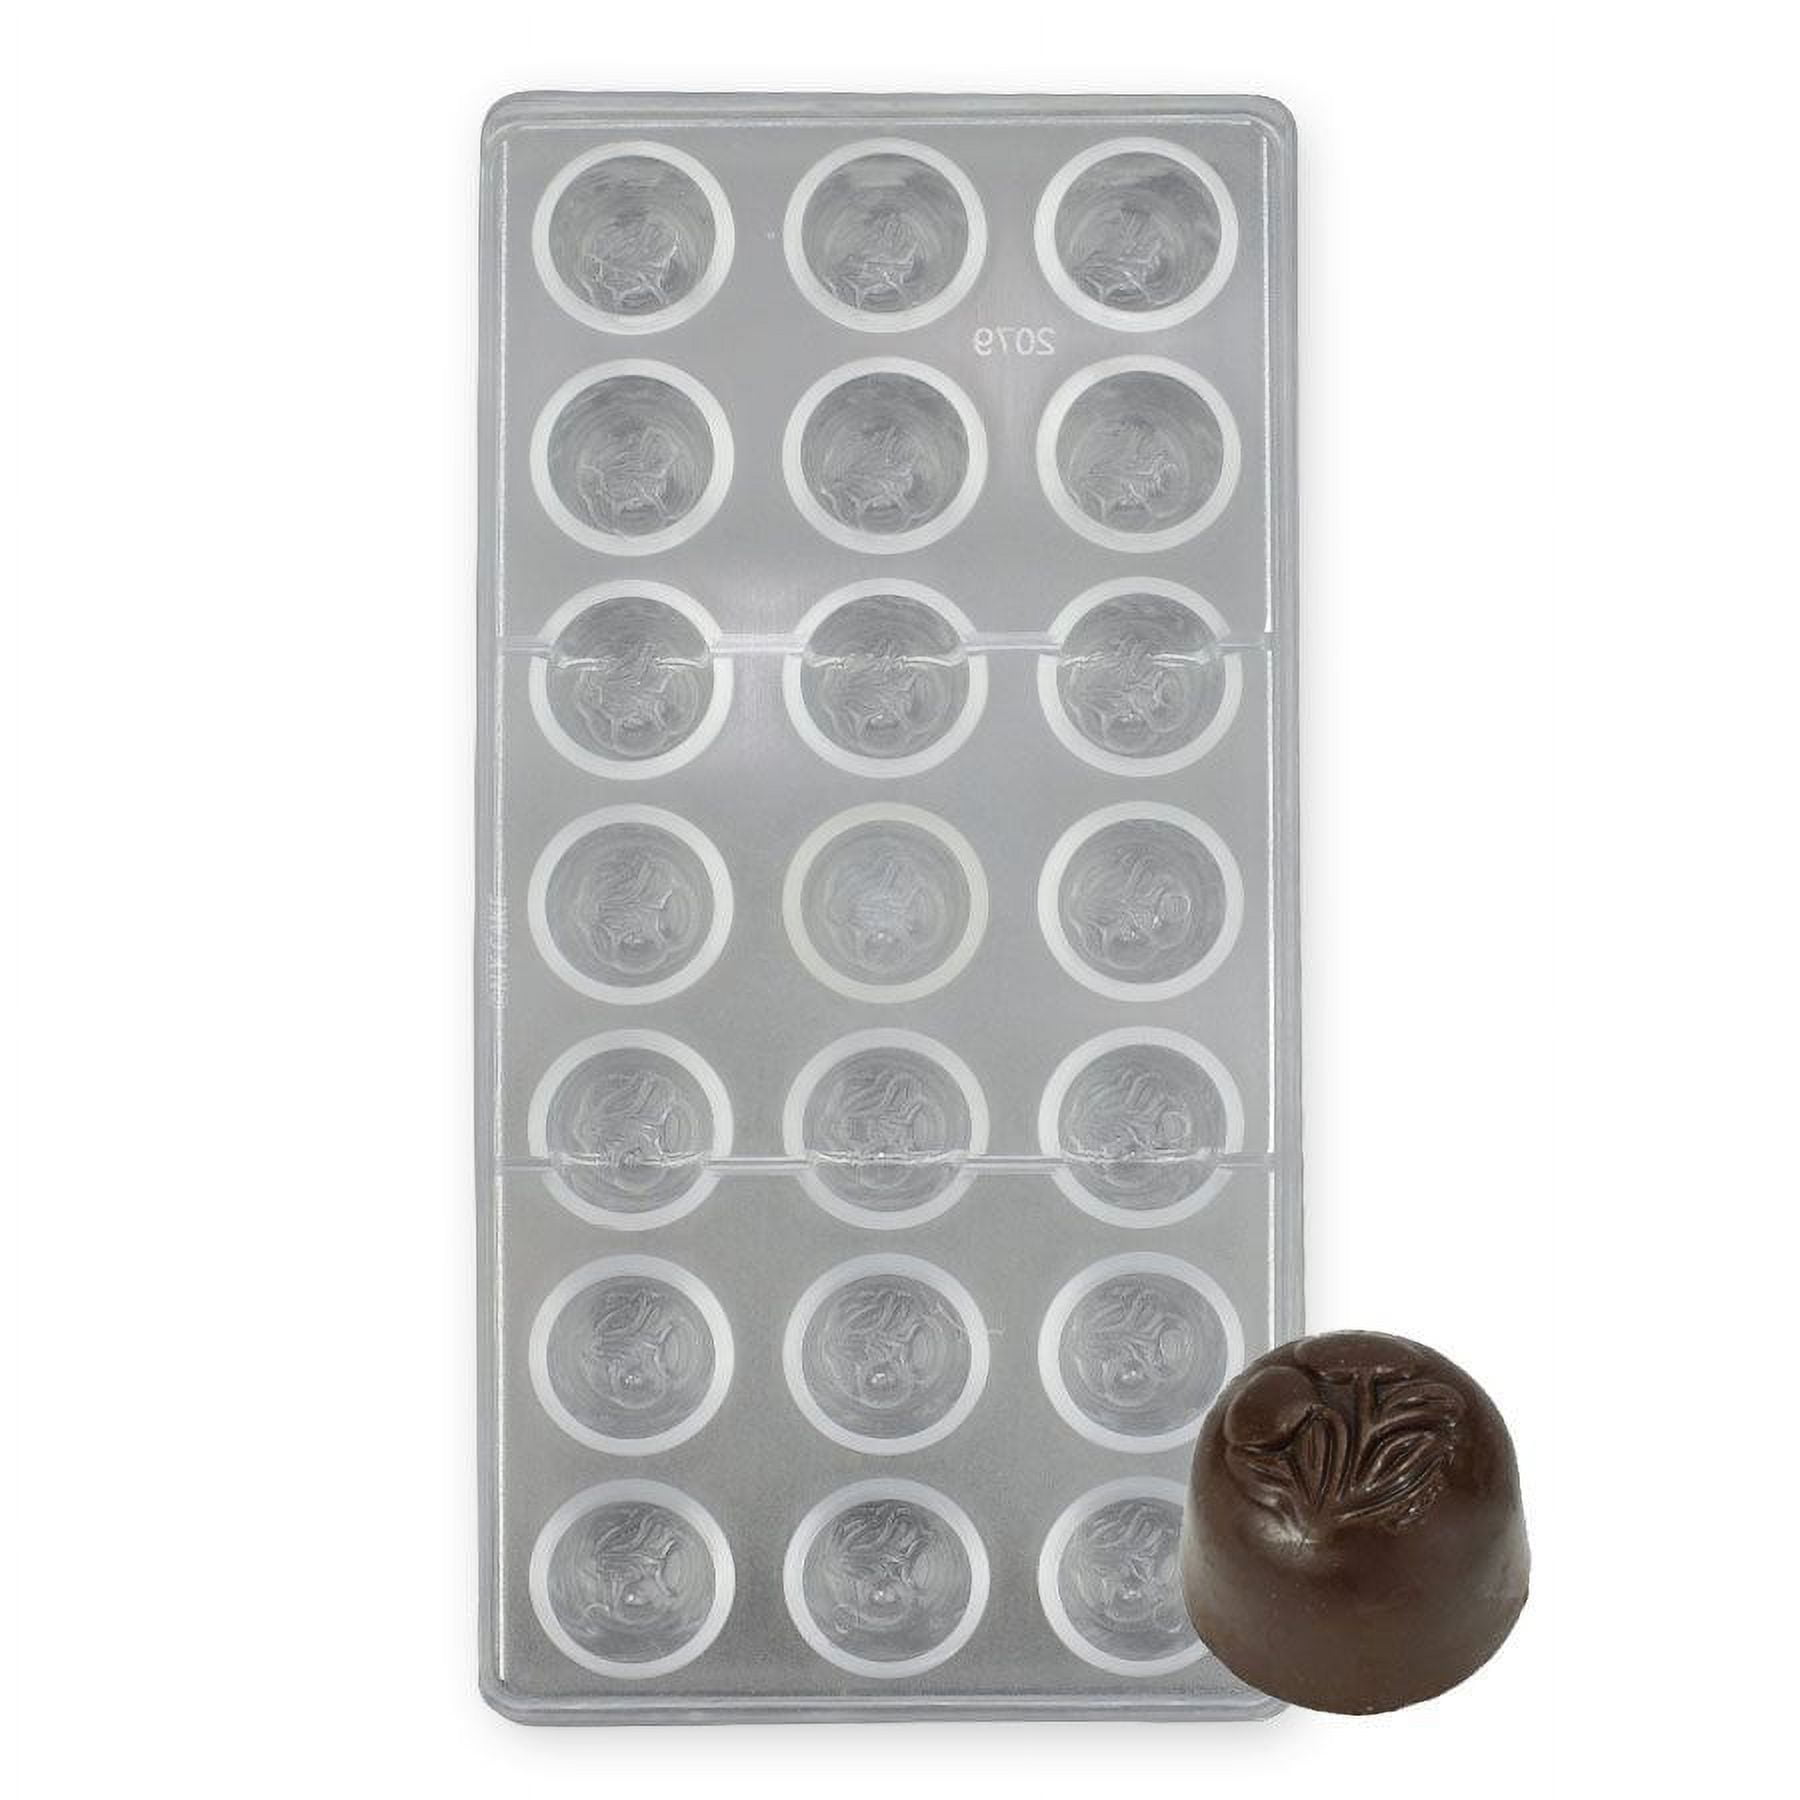 Palksky 2 Pcs Silicone Molds for Chocolate Covered Cherries Making,  15-Cavity Candy Baking Molds for Chocolate Truffles, Fat Bombs, Bite Size  Snack